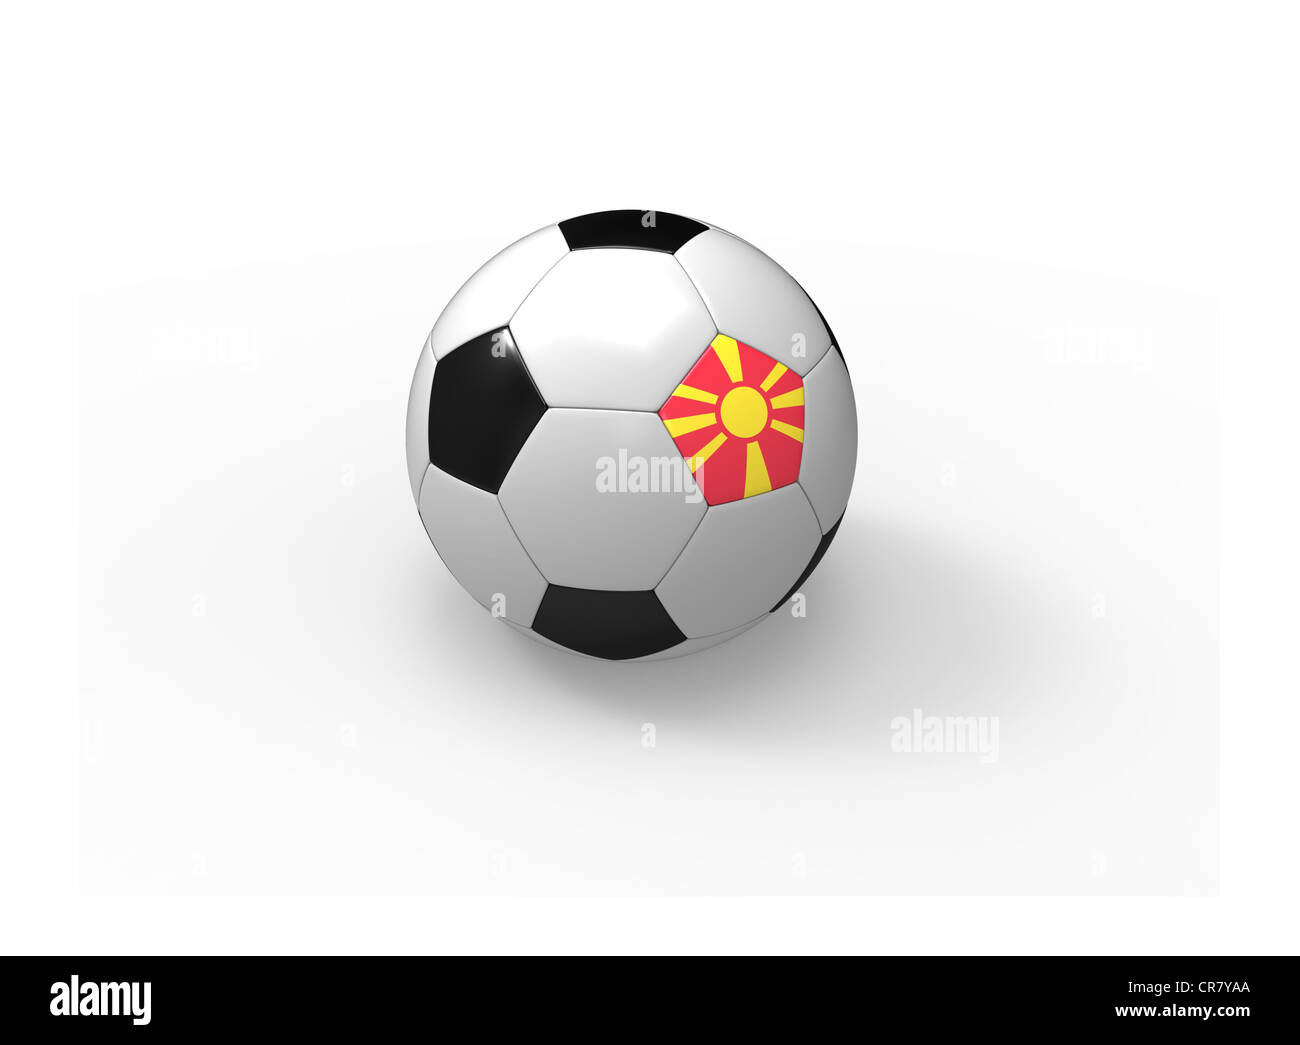 Soccer ball, 3d rendering with Macedonia flag, isolated on white background, light shadow Stock Photo